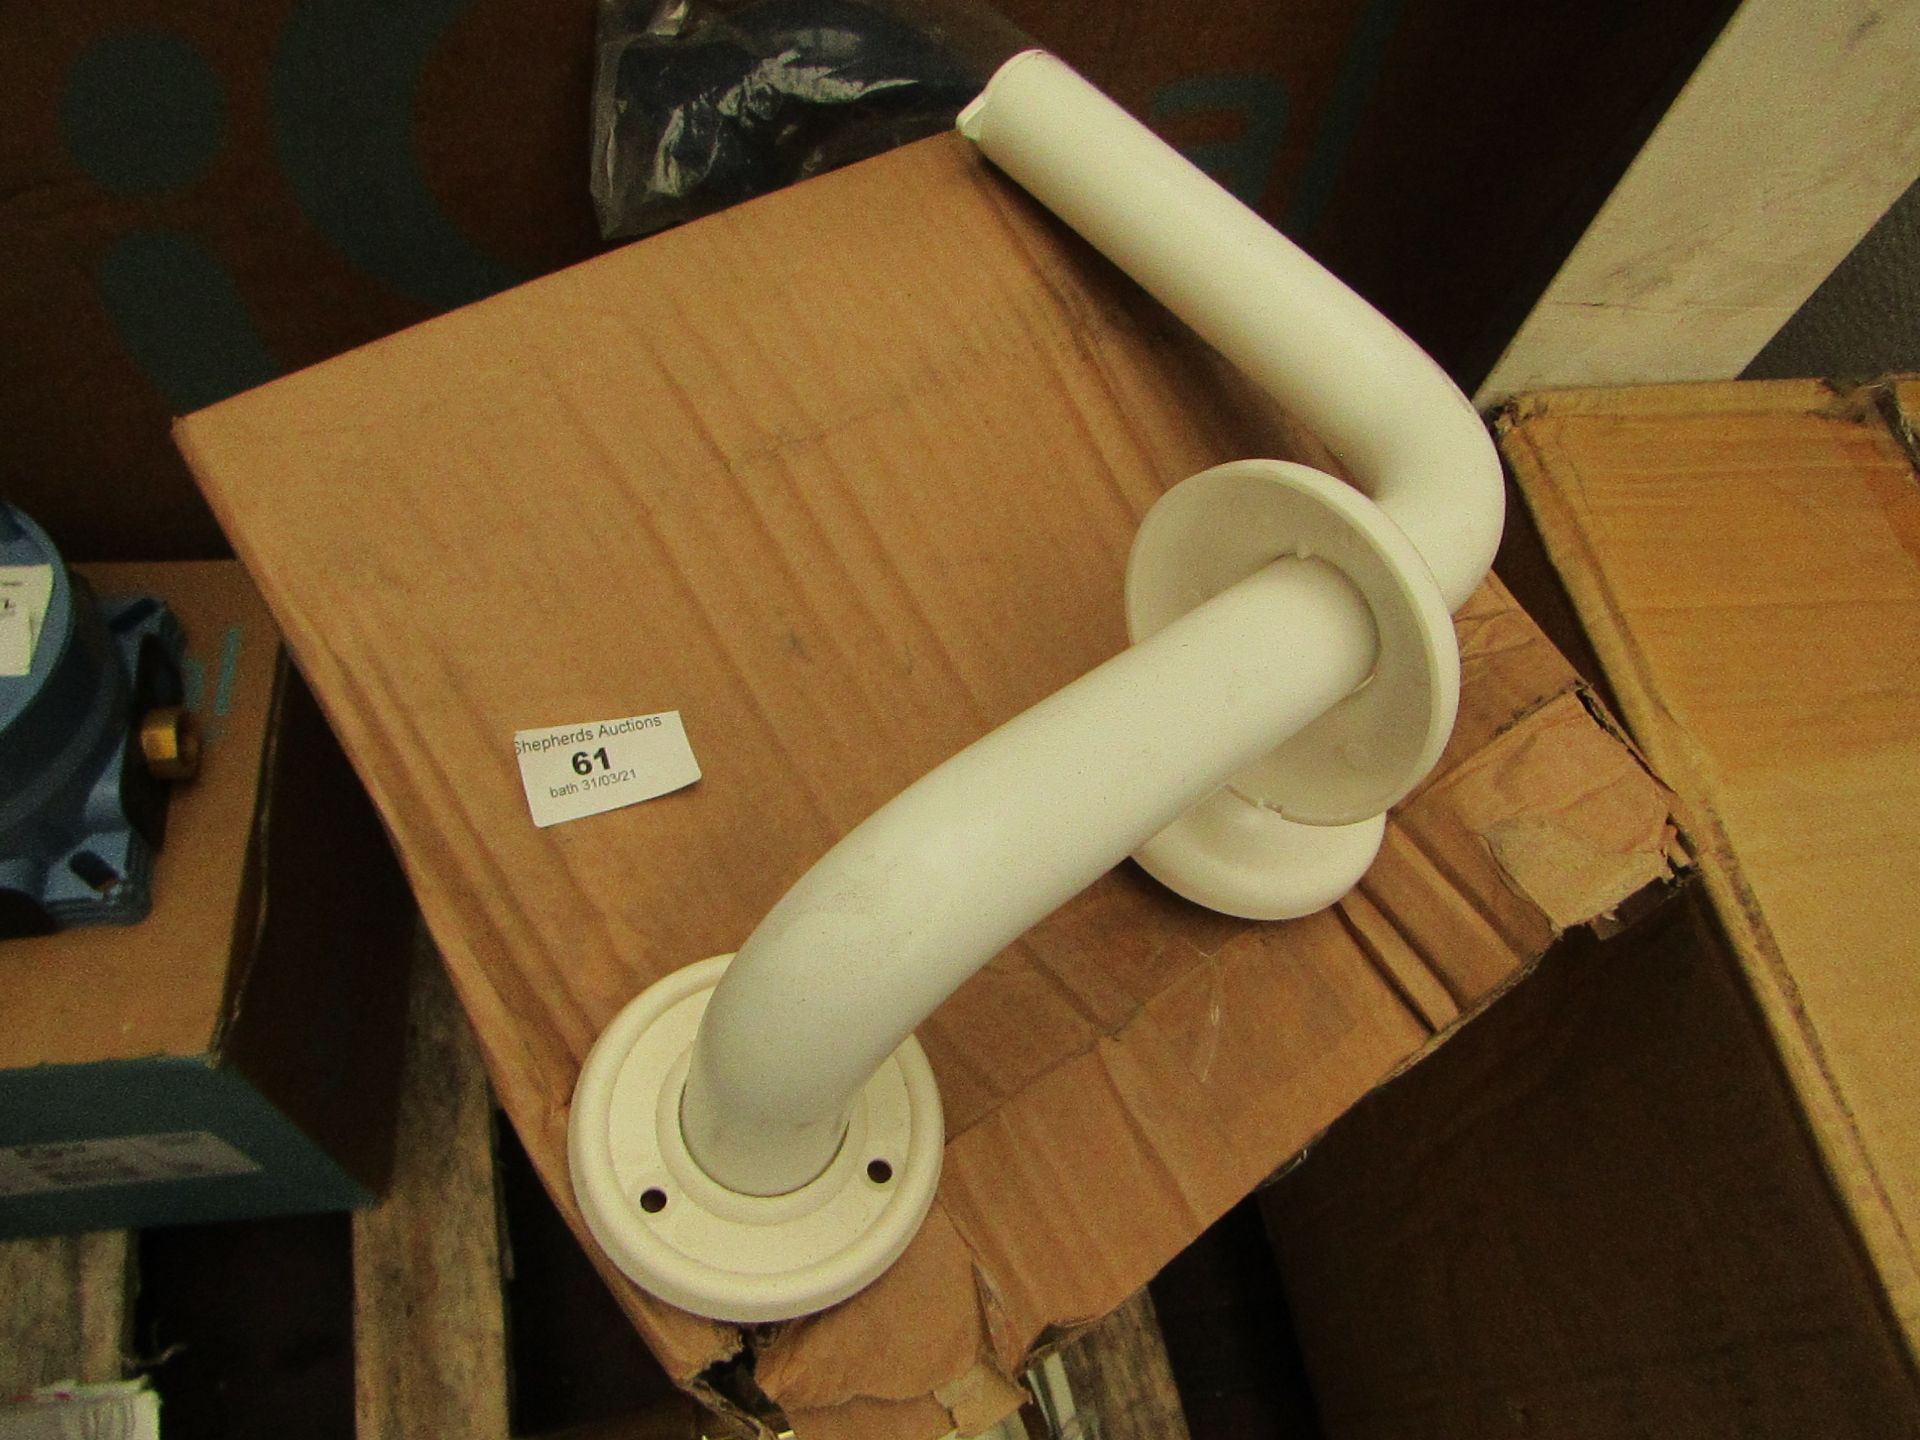 5x Toilet roll holders, new and boxed.